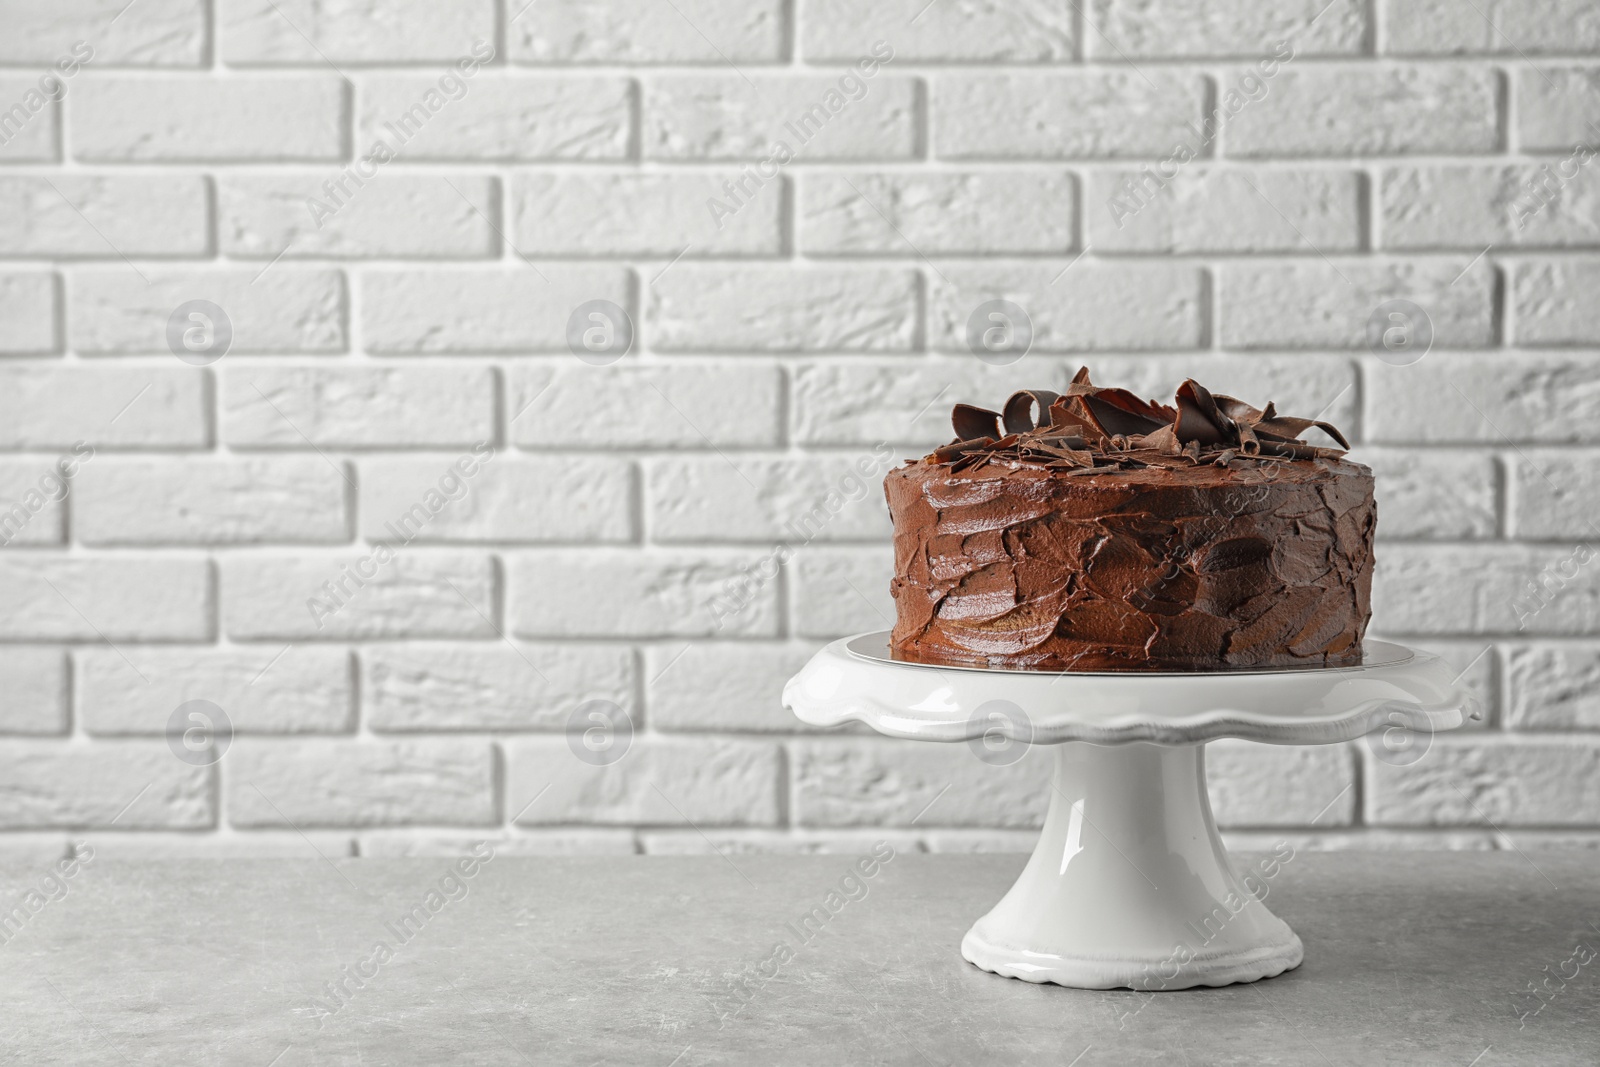 Photo of Stand with tasty homemade chocolate cake on table near brick wall. Space for text